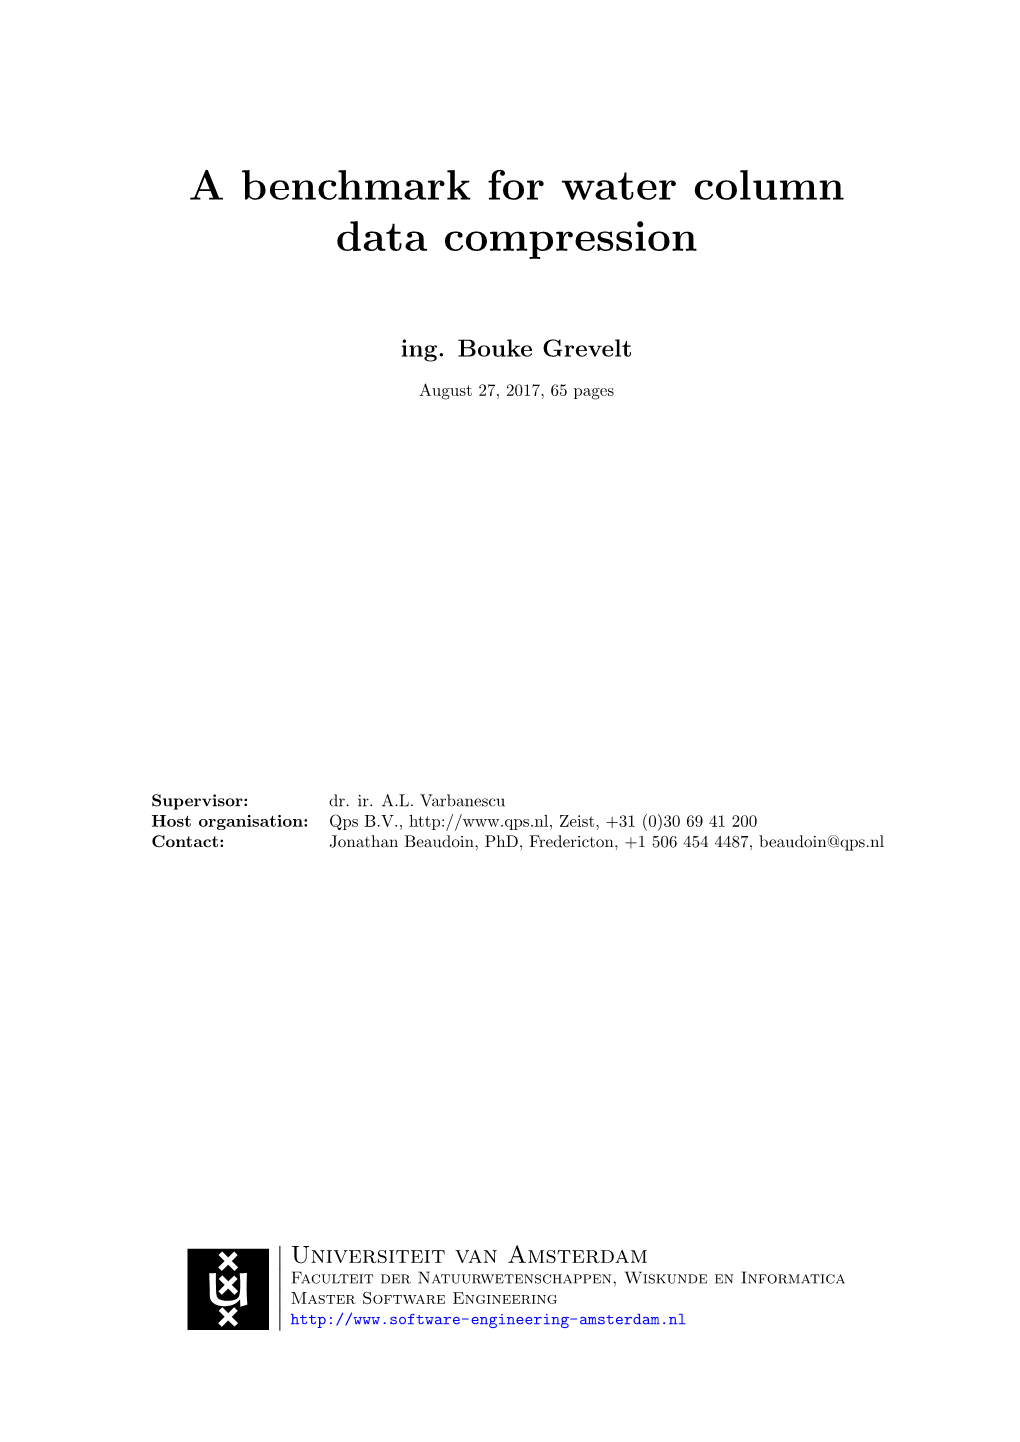 A Benchmark for Water Column Data Compression